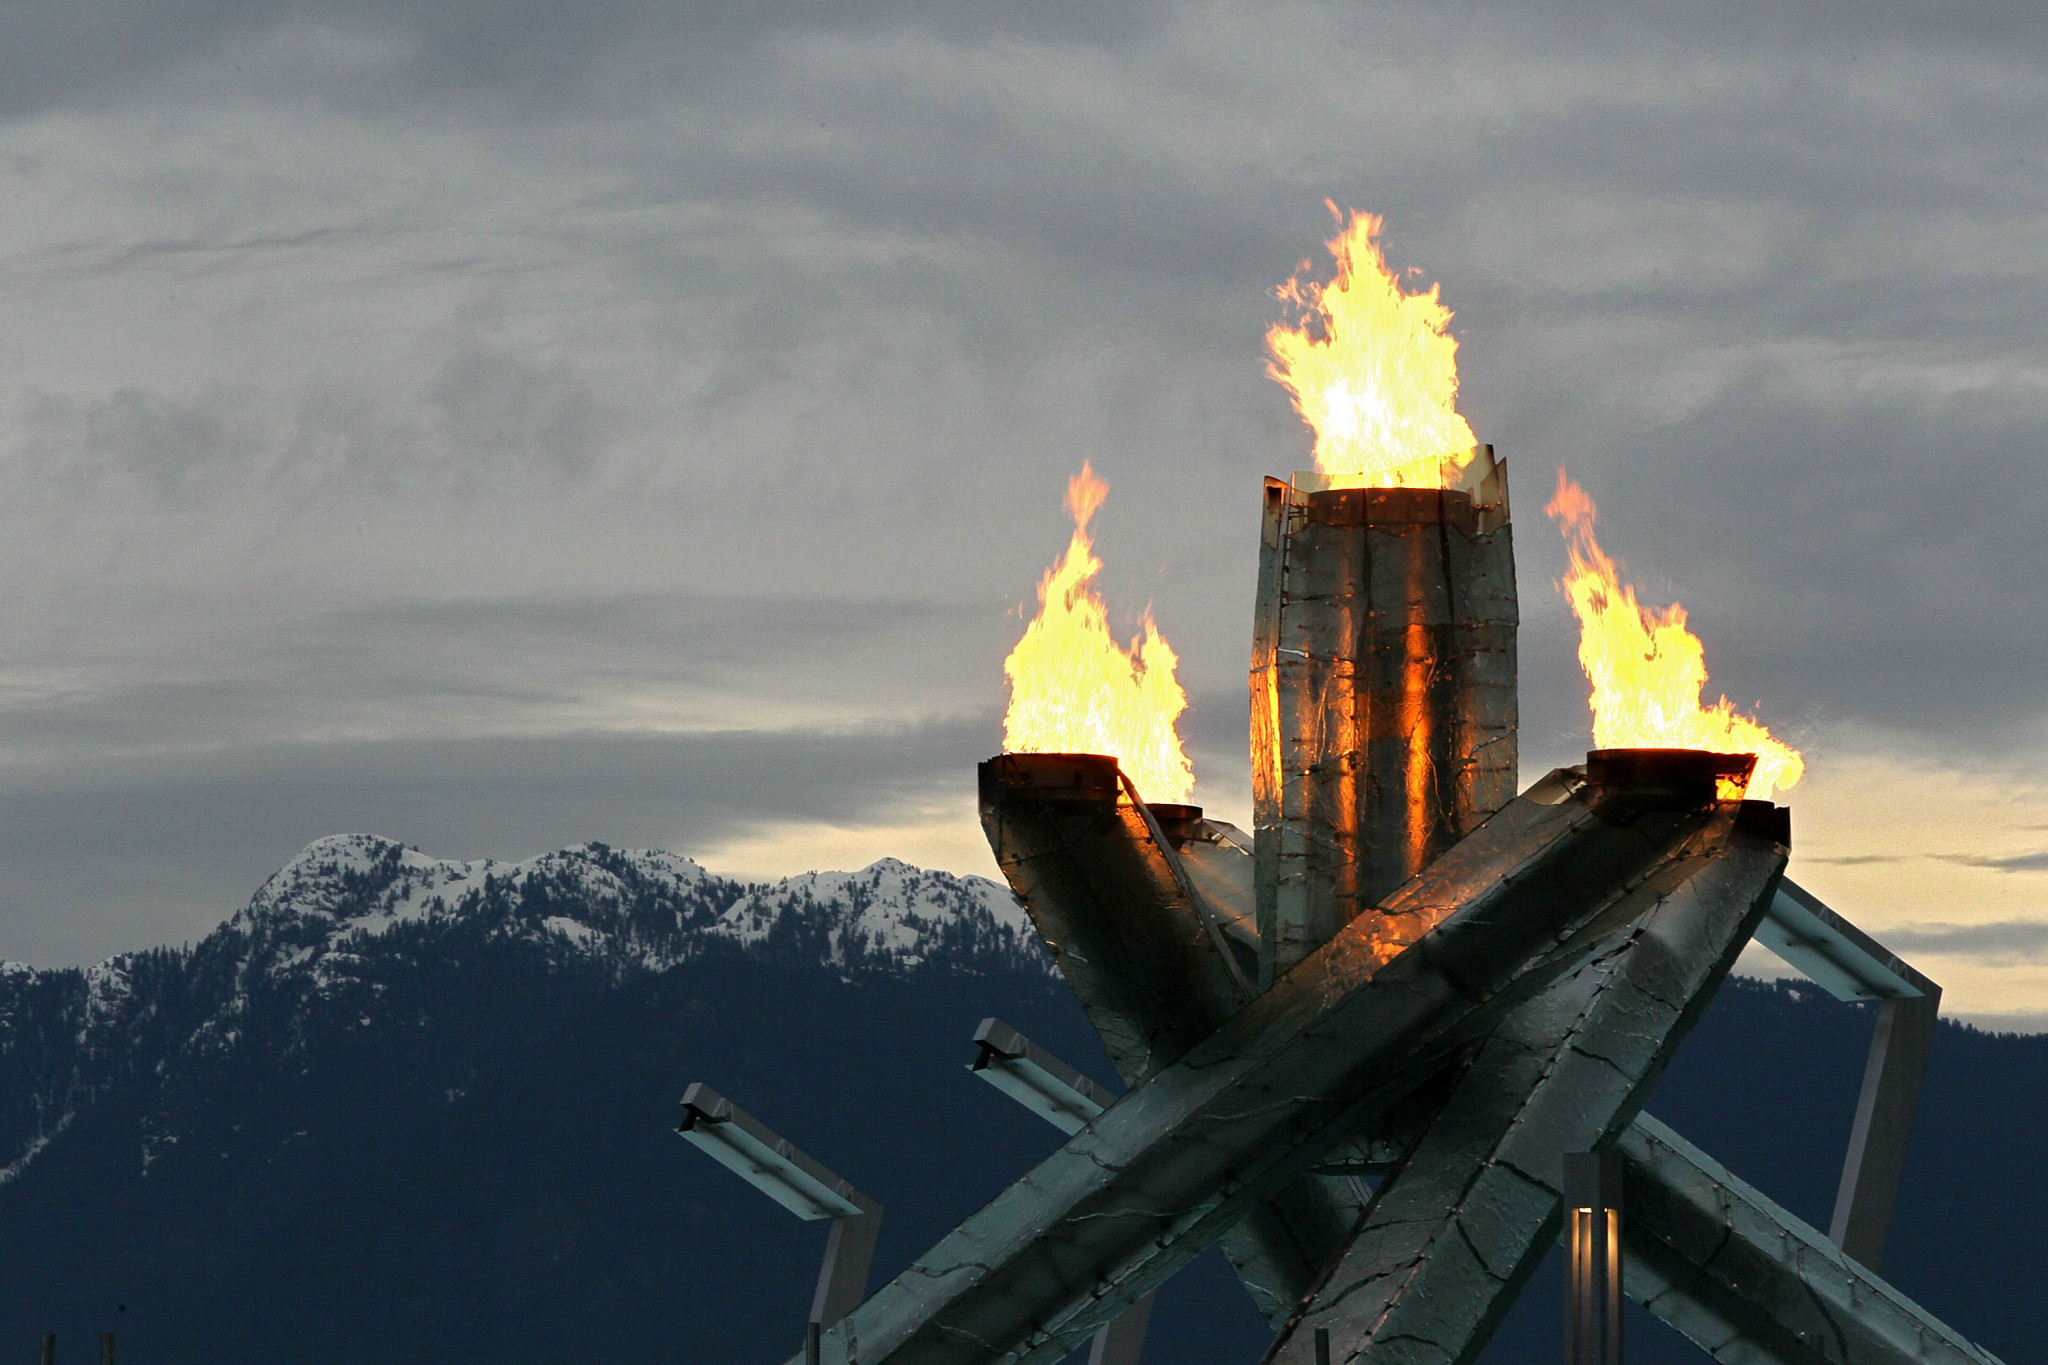 A vote could be held on Vancouver's proposed bid for the 2030 Winter Olympics and Paralympics  ©Getty Images